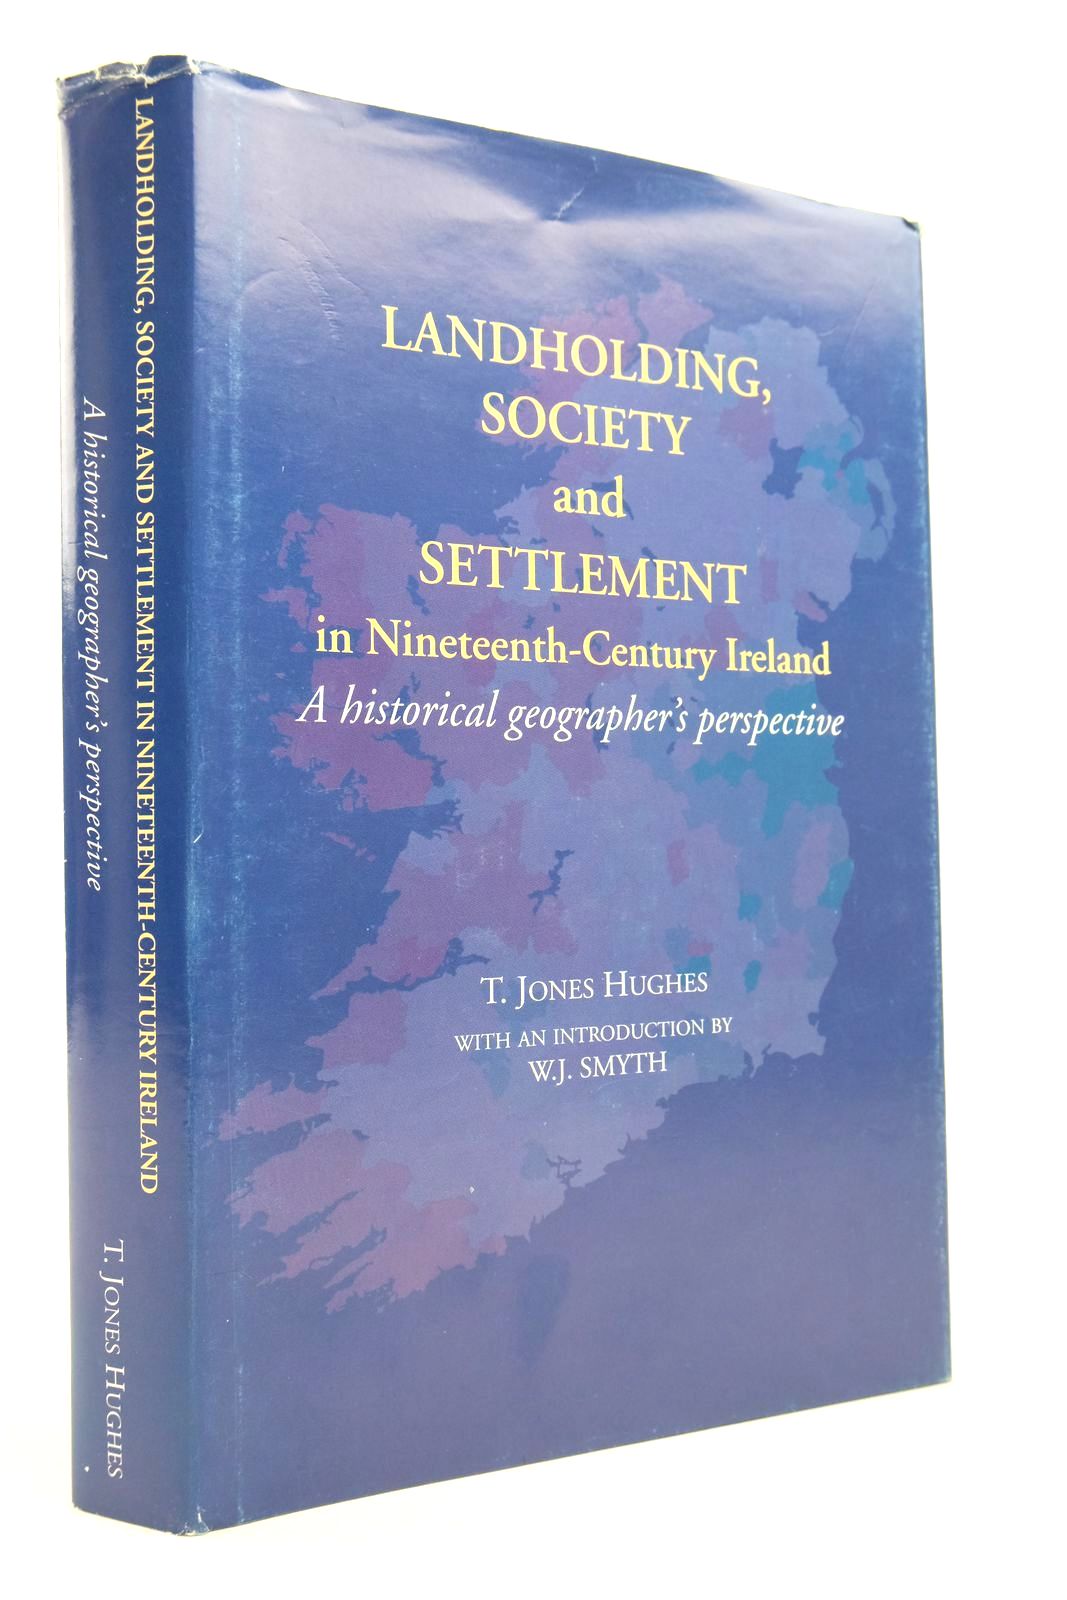 Photo of LANDHOLDING, SOCIETY AND SETTLEMENT IN NINETEENTH-CENTURY IRELAND: A HISTORICAL GEOGRAPHER'S PERSPECTIVE written by Hughes, T. Jones Smyth, William J. published by Geography Publications (STOCK CODE: 2140675)  for sale by Stella & Rose's Books